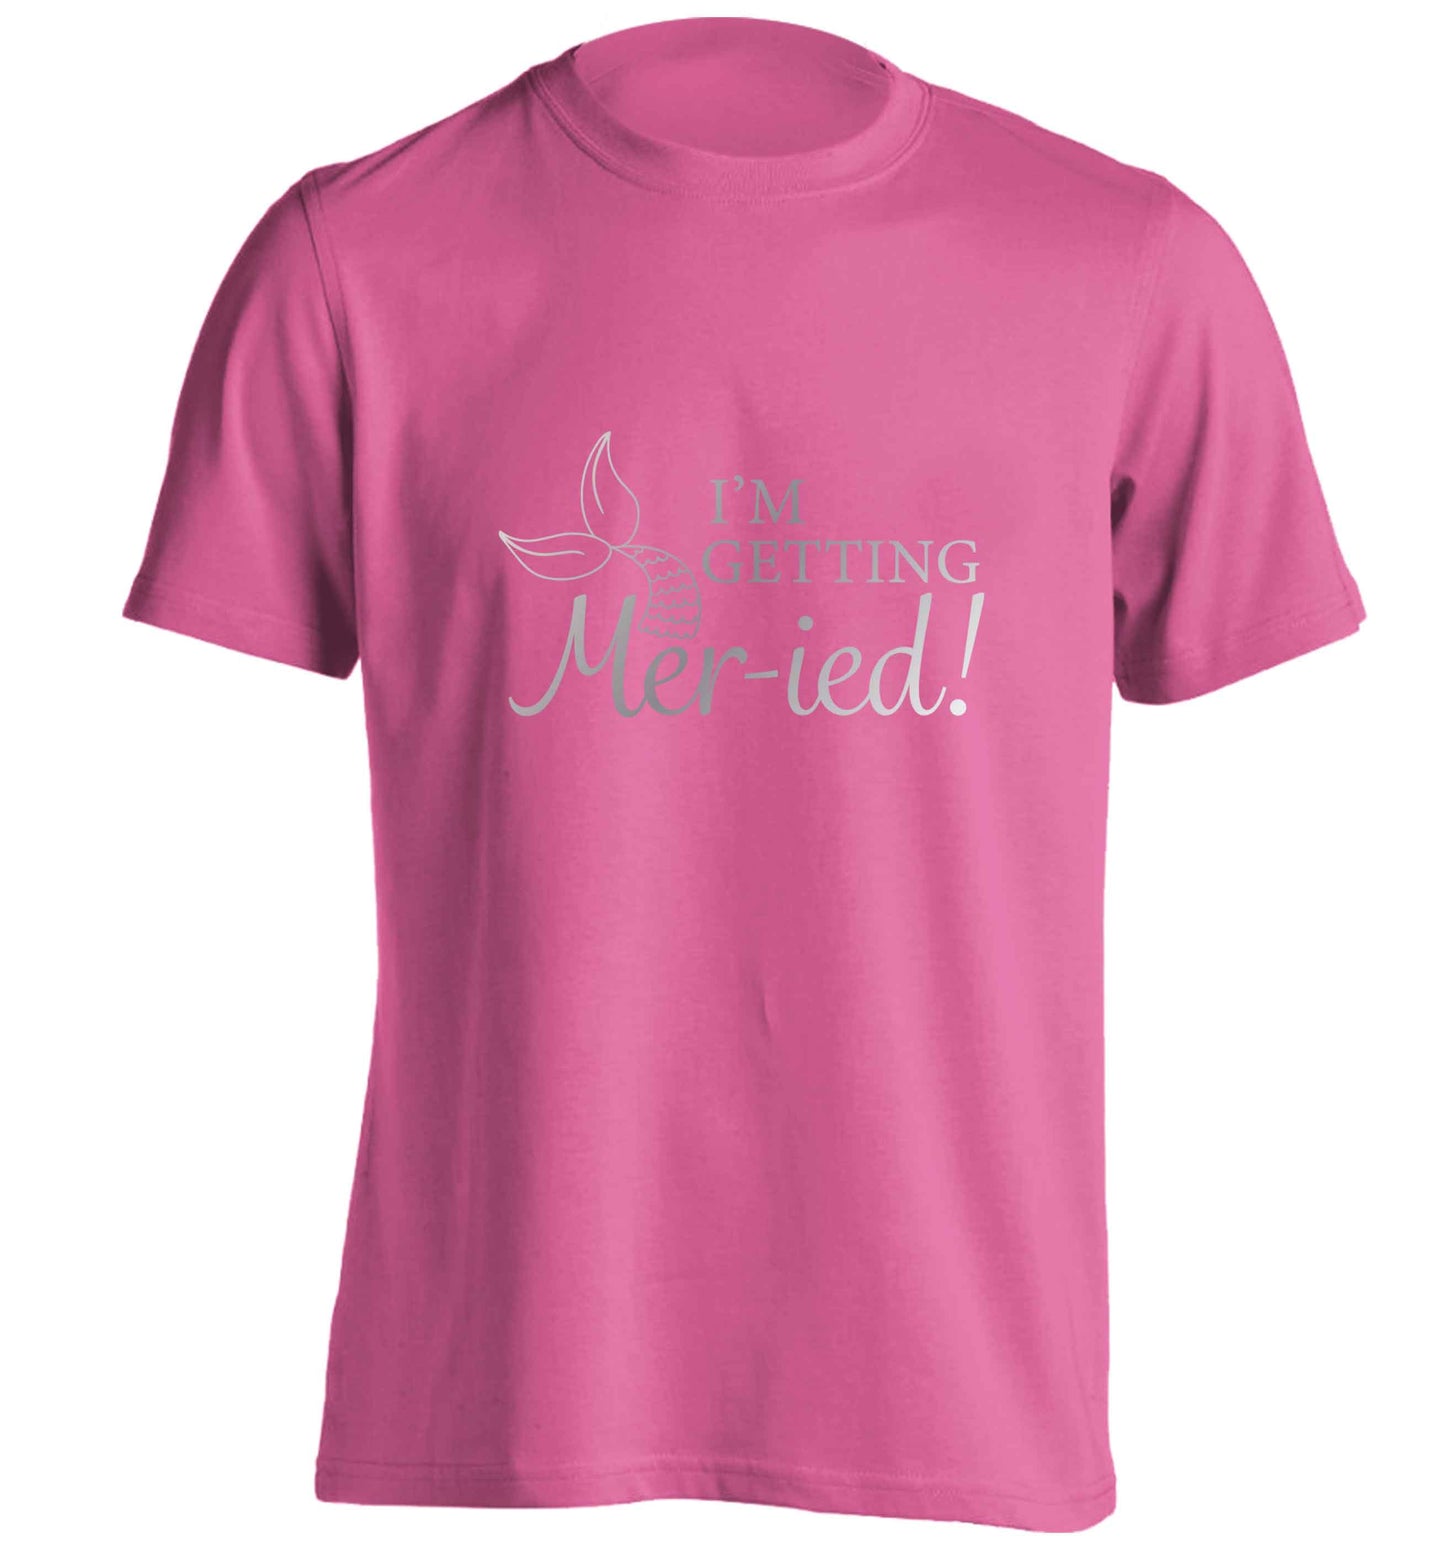 Personalised wedding thank you's Mr and Mrs wedding and date! Ideal wedding favours! adults unisex pink Tshirt 2XL